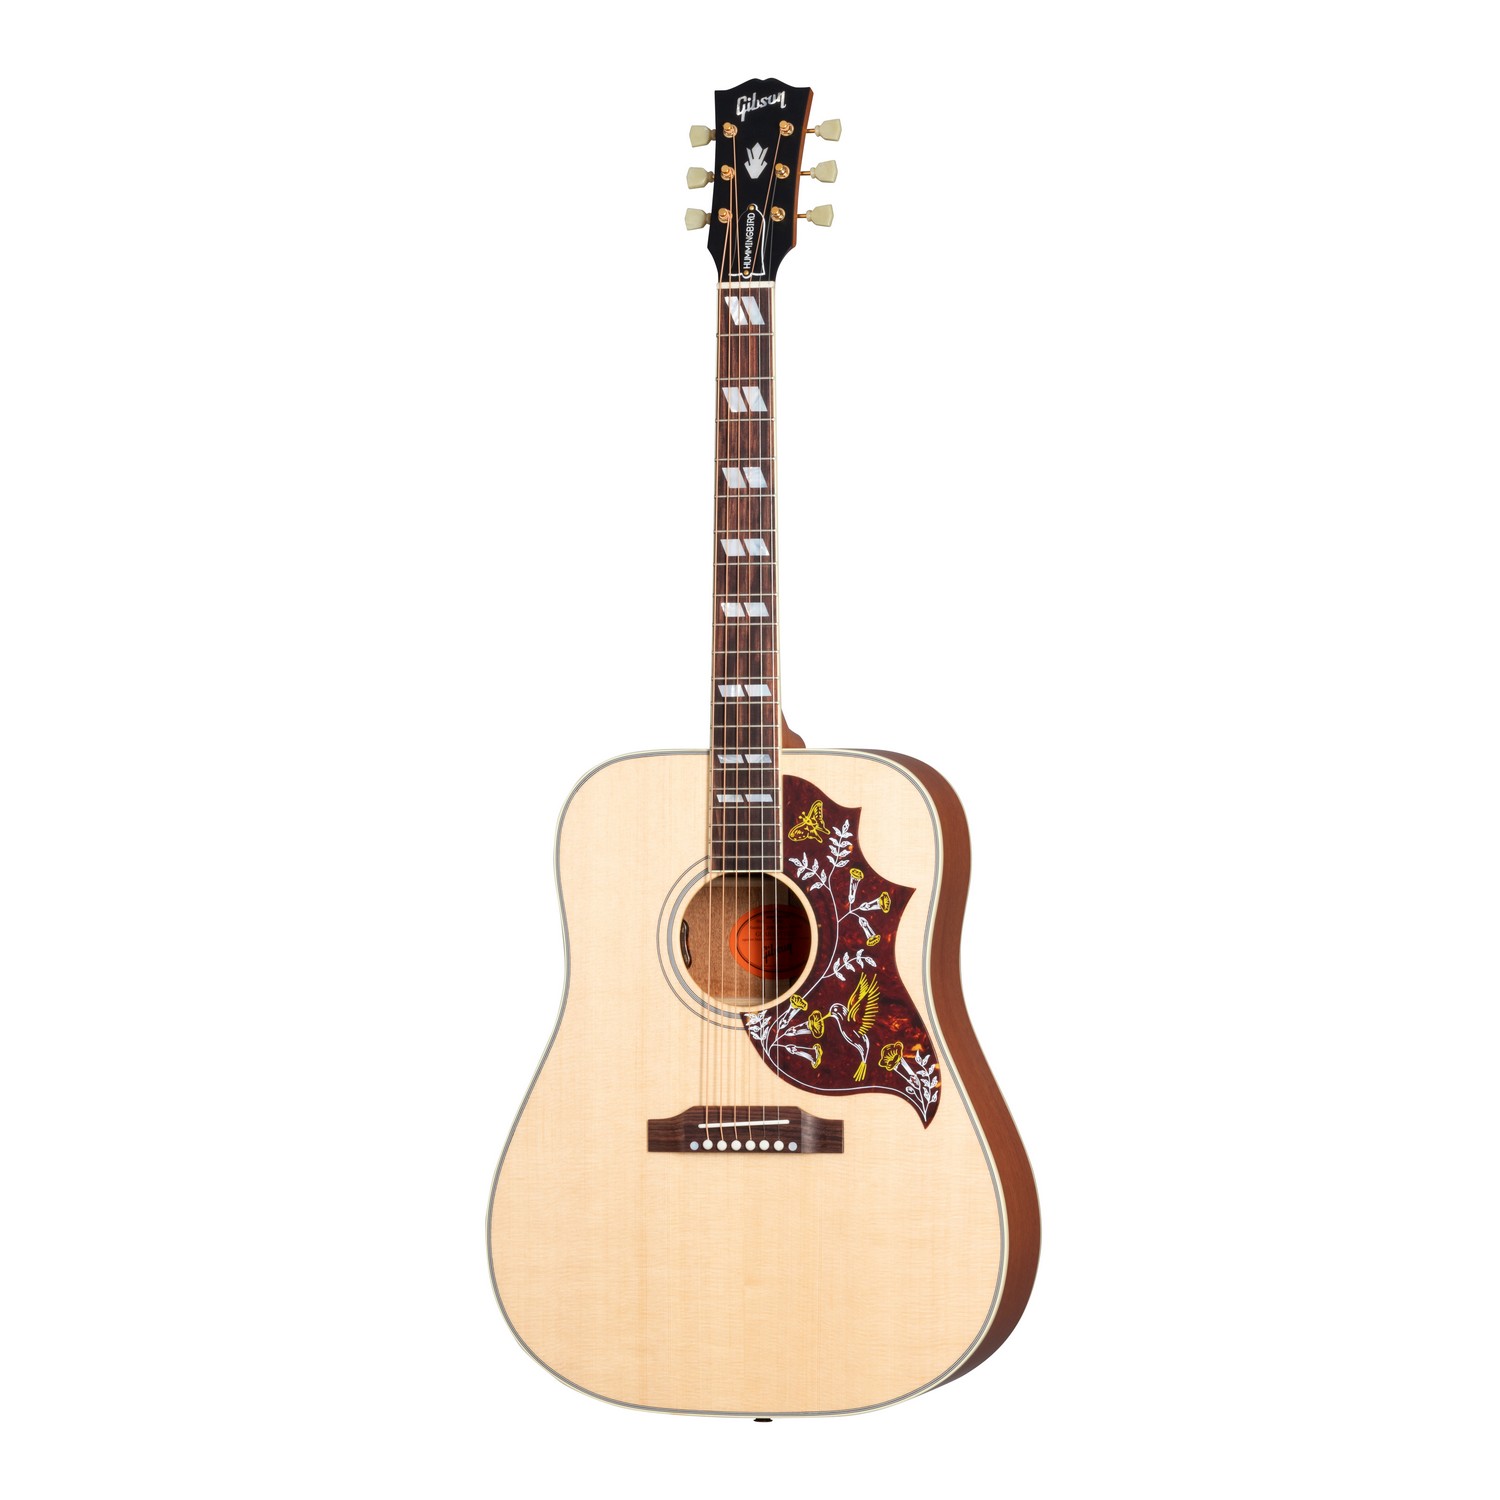 An image of Gibson Hummingbird Faded Antique Natural | PMT Online